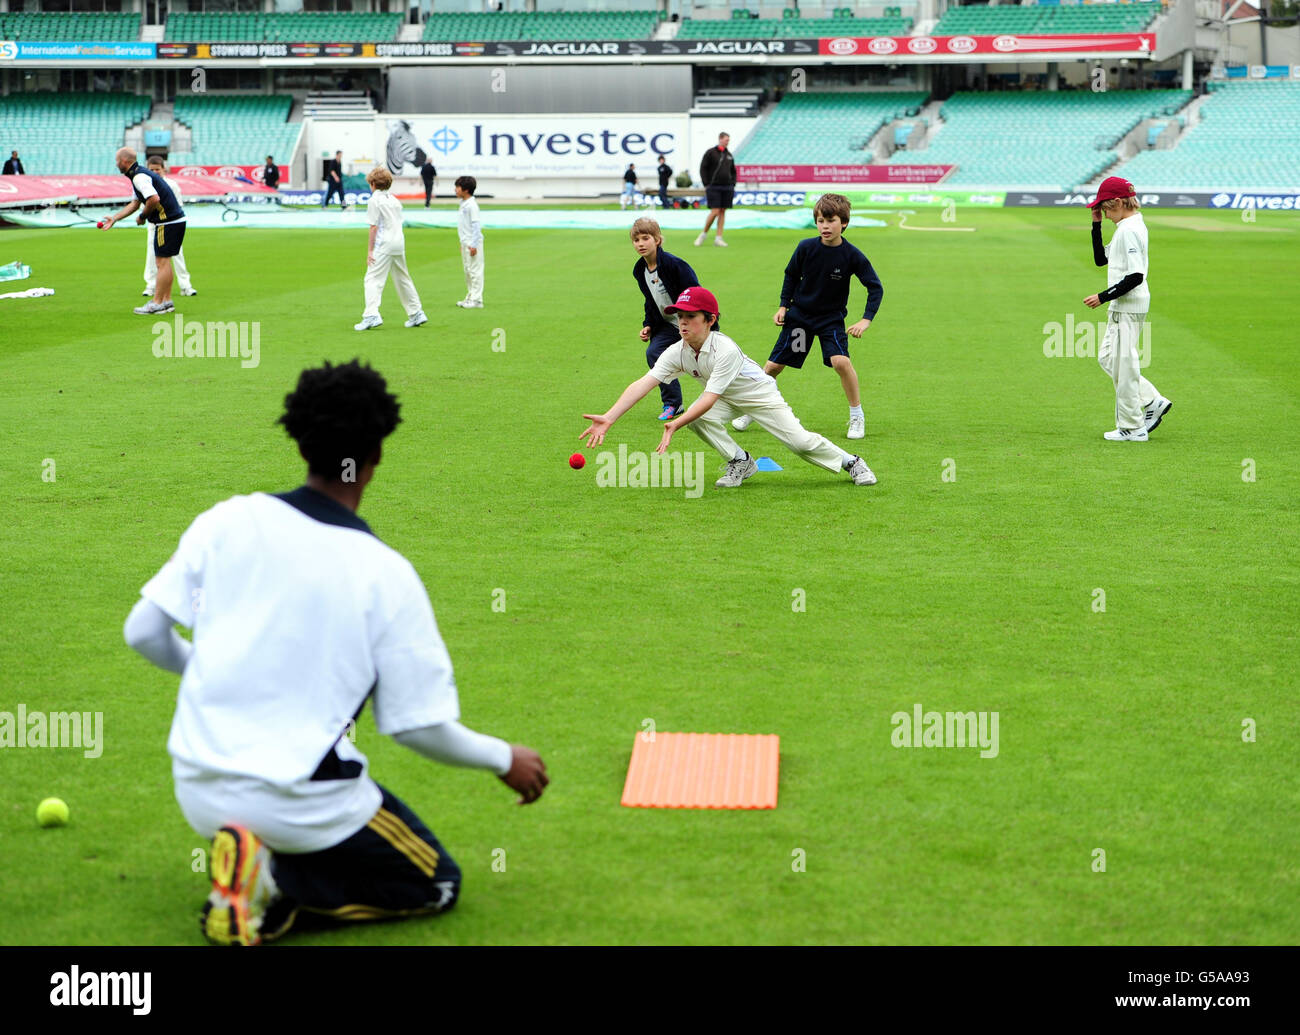 Cricket - 2012 Investec Test Series - First Test - England v South Africa - South Africa Nets - The Kia Oval Stock Photo